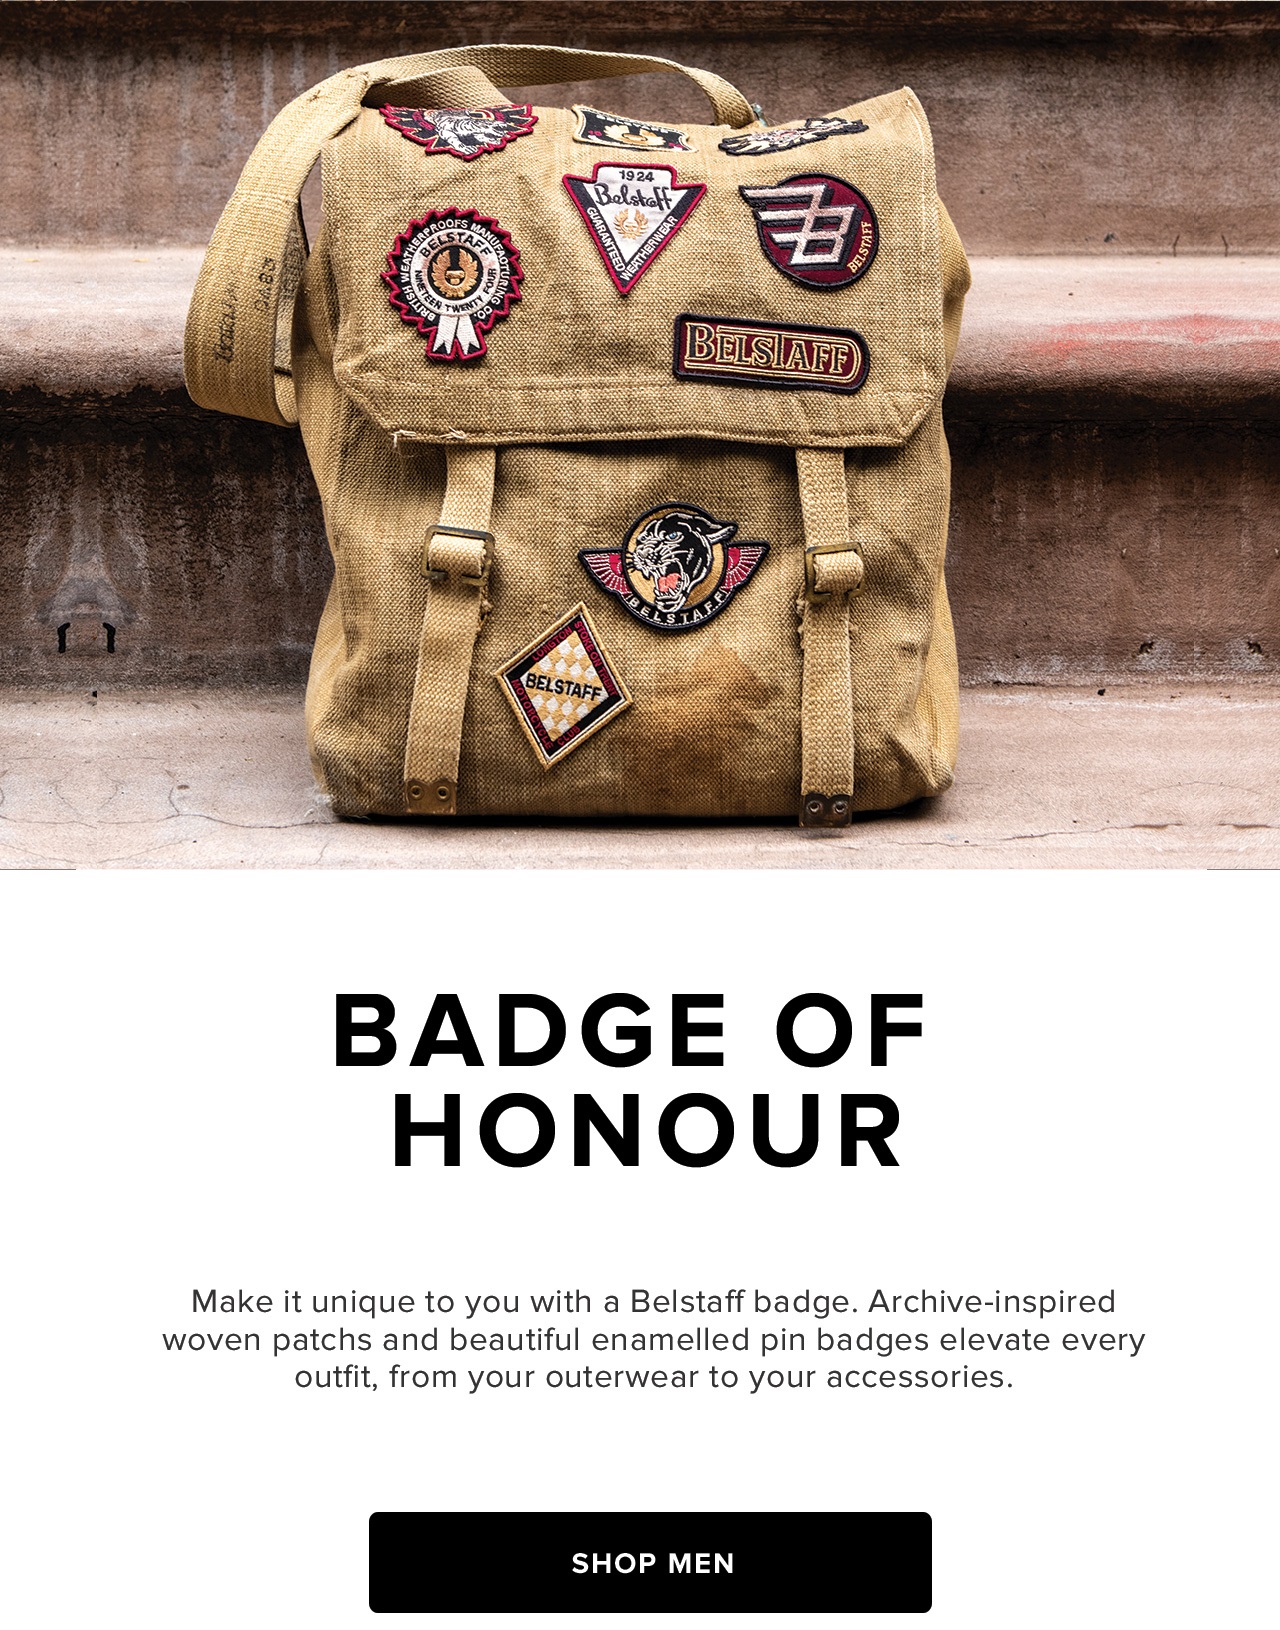 Make it unique to you with a Belstaff badge. Archive-inspired woven patchs and beautiful enamelled pin badges elevate every outfit, from your outerwear to your accessories.	